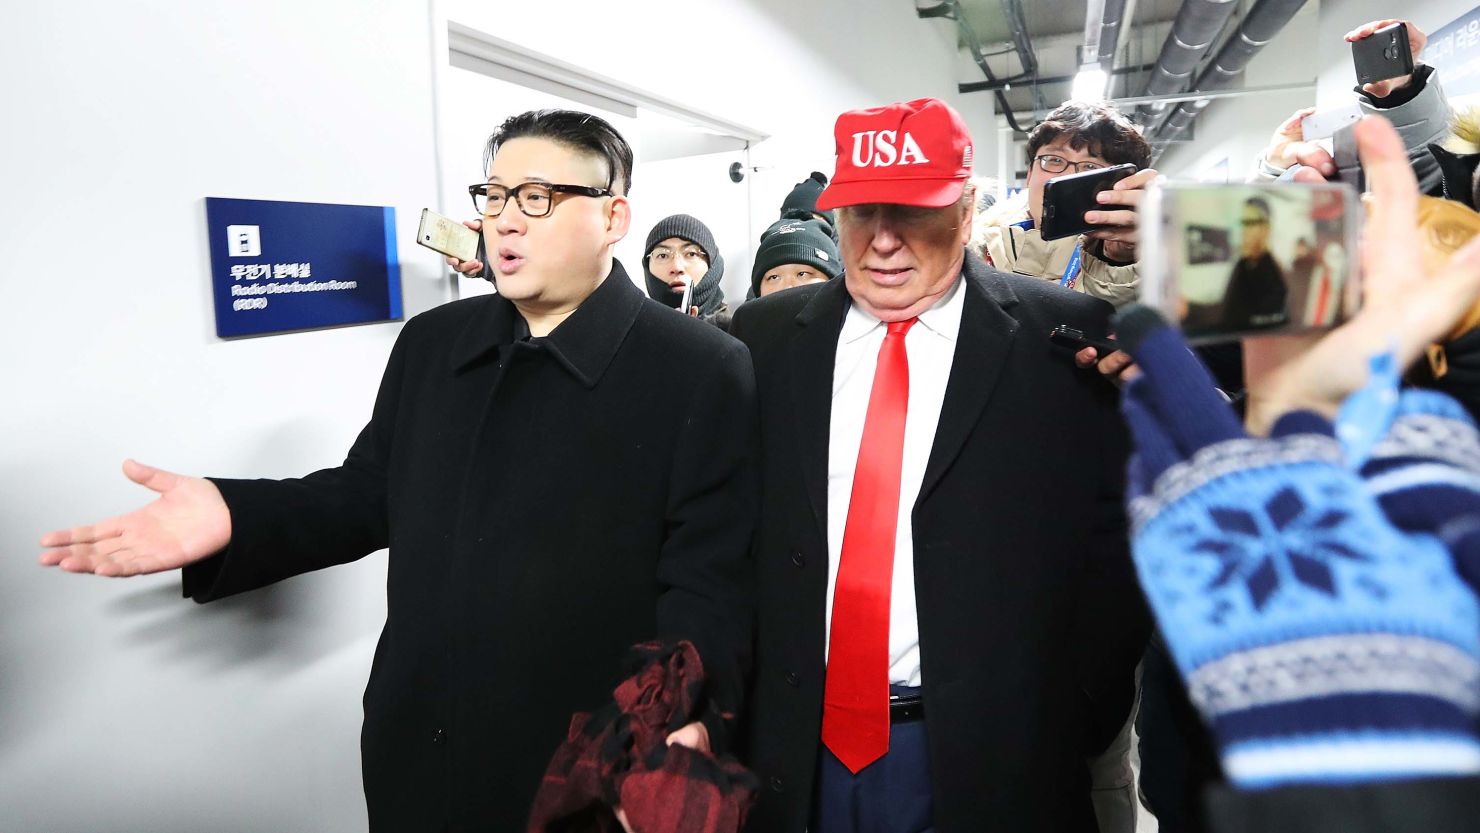 impersonators of Donald Trump and Kim Jong Un at the Opening Ceremony of the PyeongChang 2018 Winter Olympic Games 